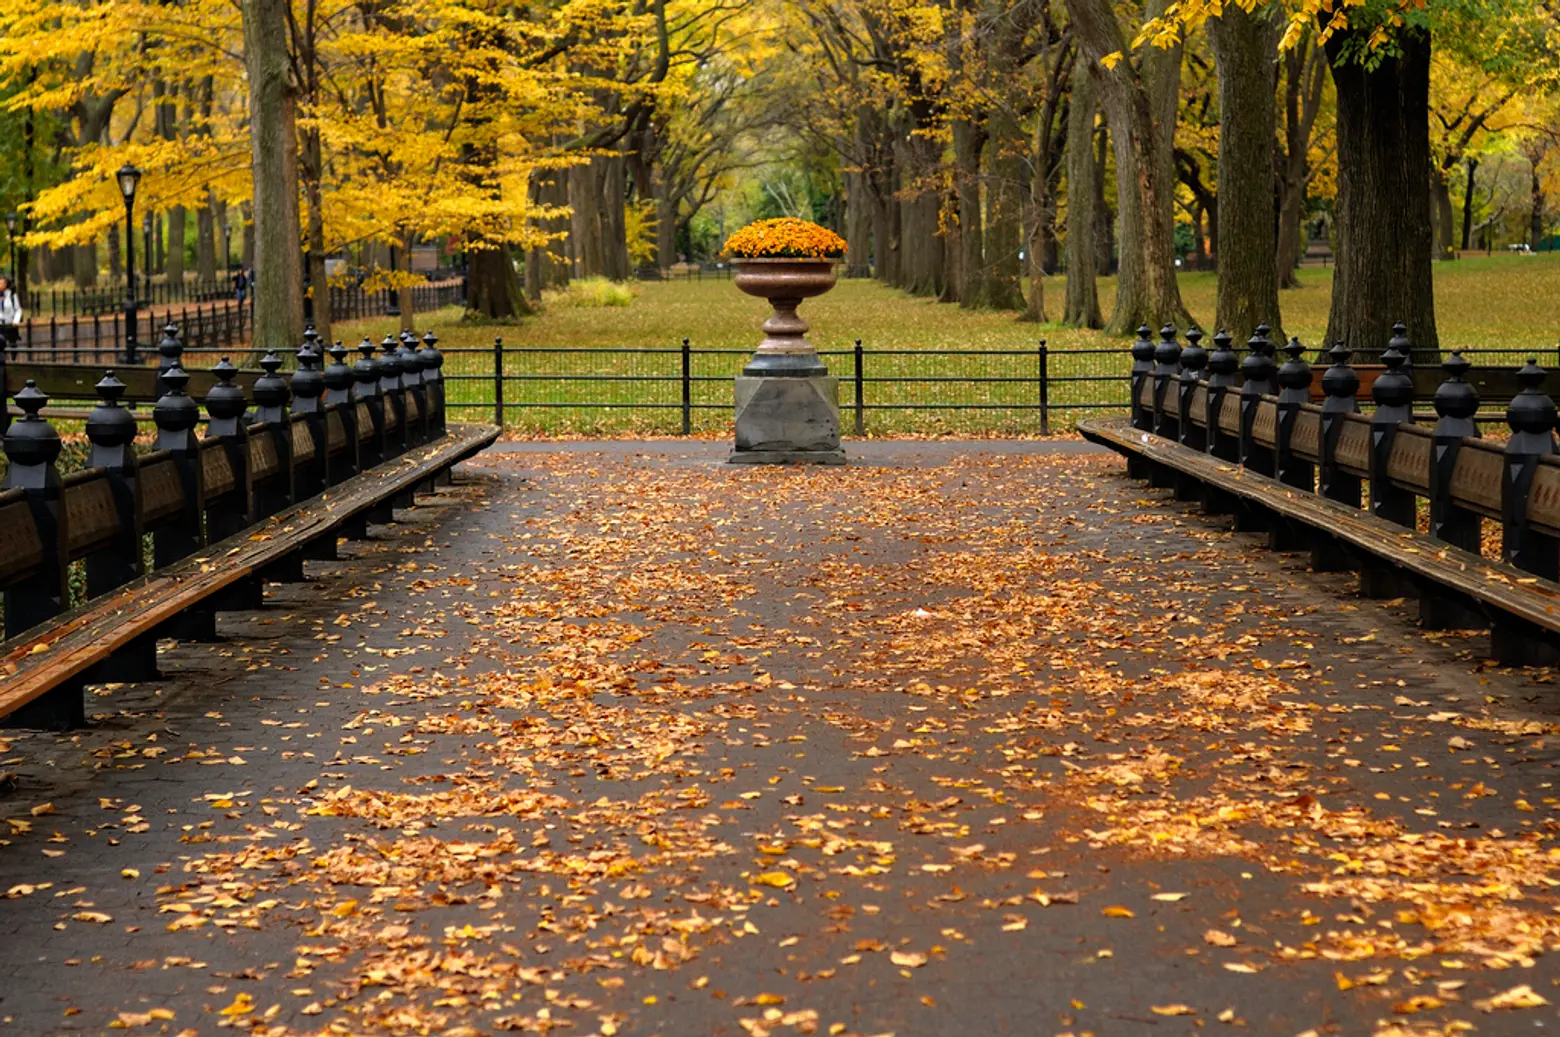 Benches lining the Mall in Central Park. Image © Flickr user Ralph Hockens